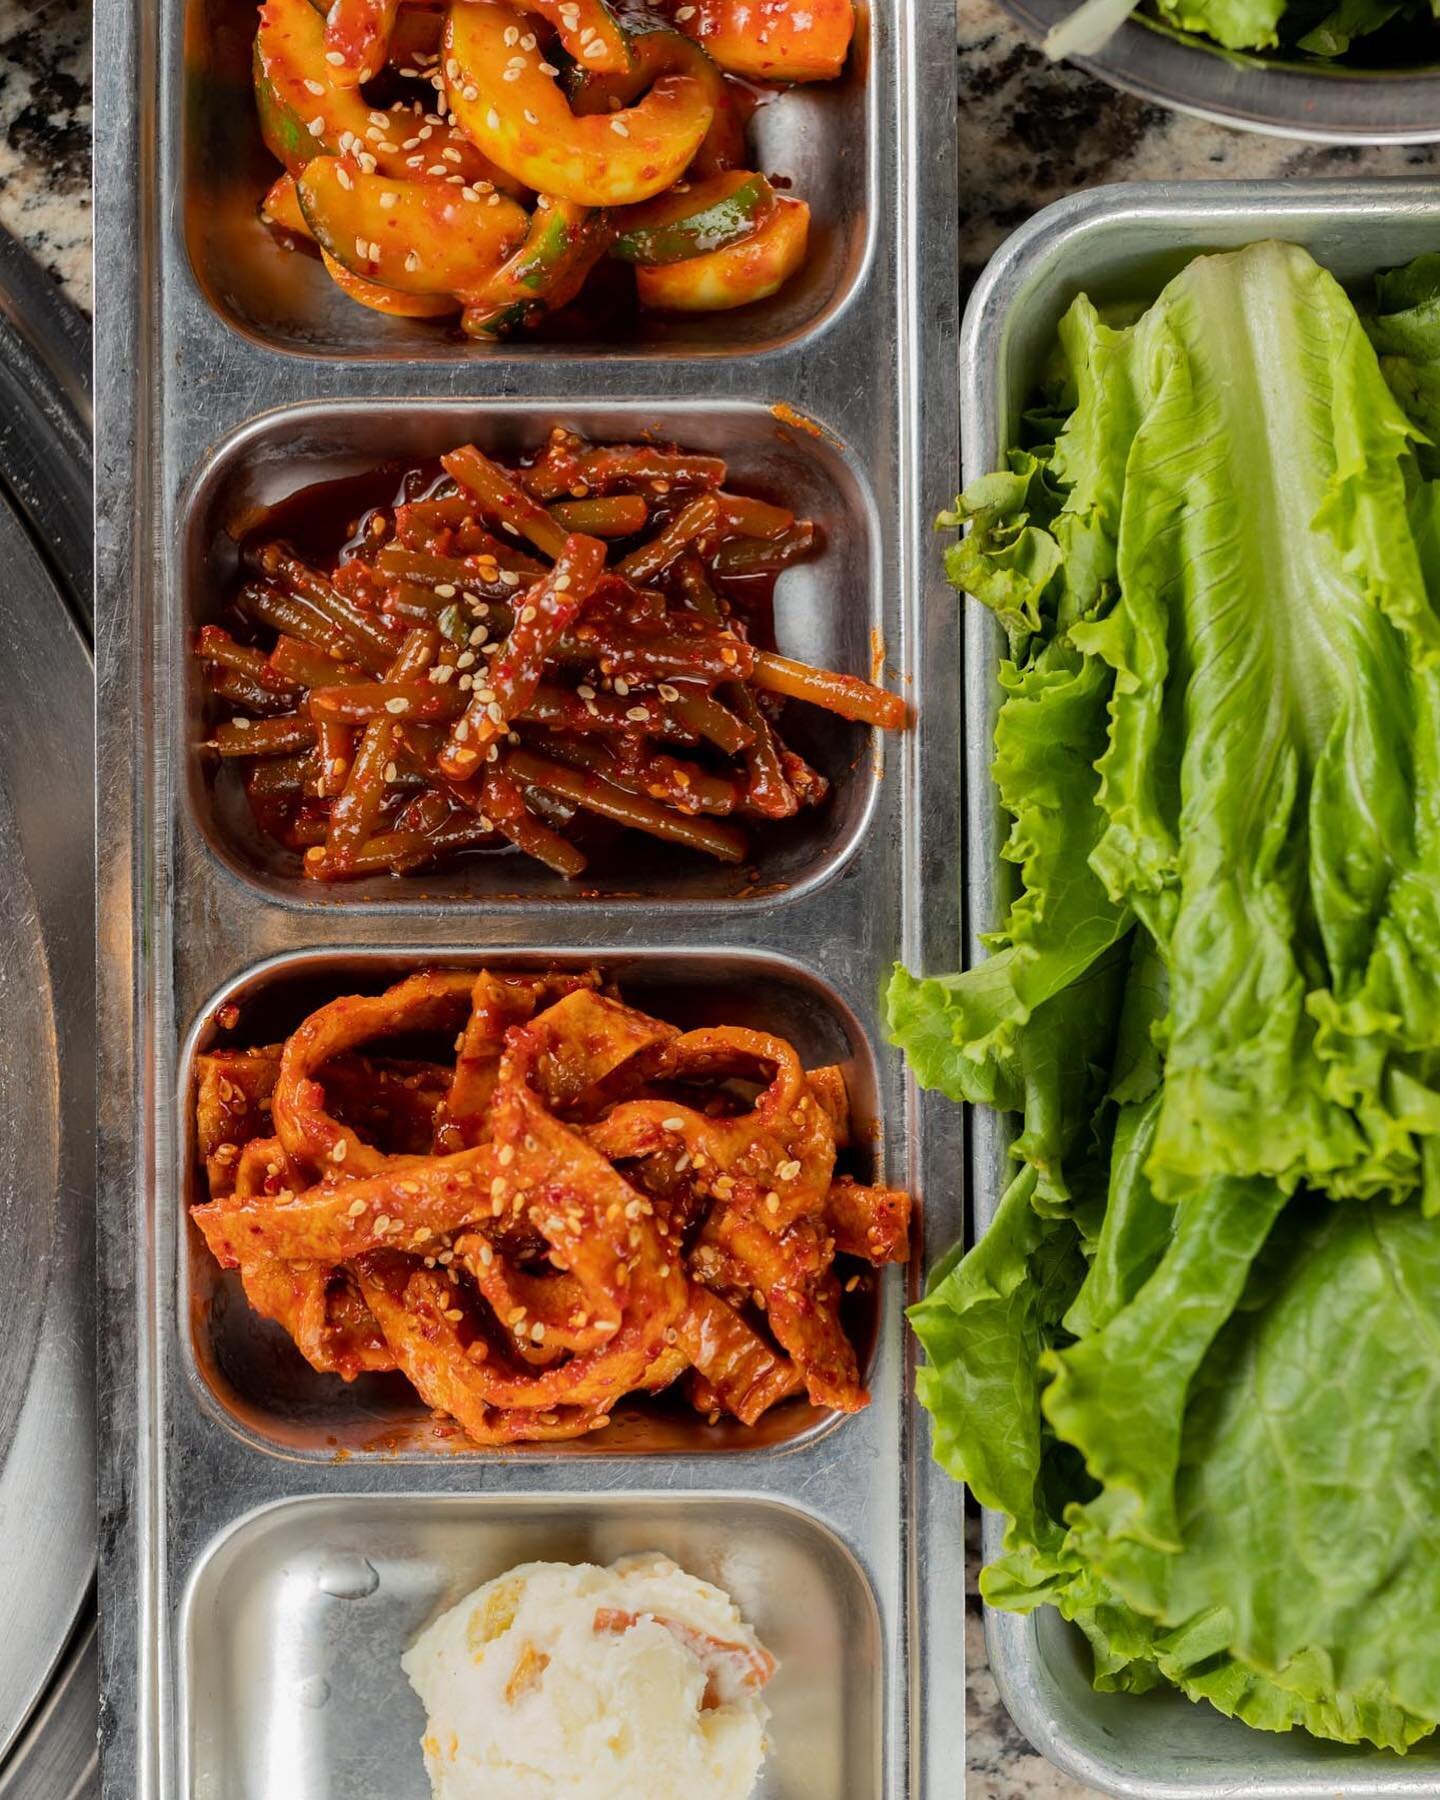 Fresh ingredients prepped and ready for you to get your grill on. 😎 Weekend hours: 
Saturday 11:30am-Midnight 
Sunday 11:30am-11pm
.
#koreanbbq #allyoucaneat #letsmeat #letsmeatkbbq #charlottenc #southendclt #clt #cltnc #clteats #cltfoodie